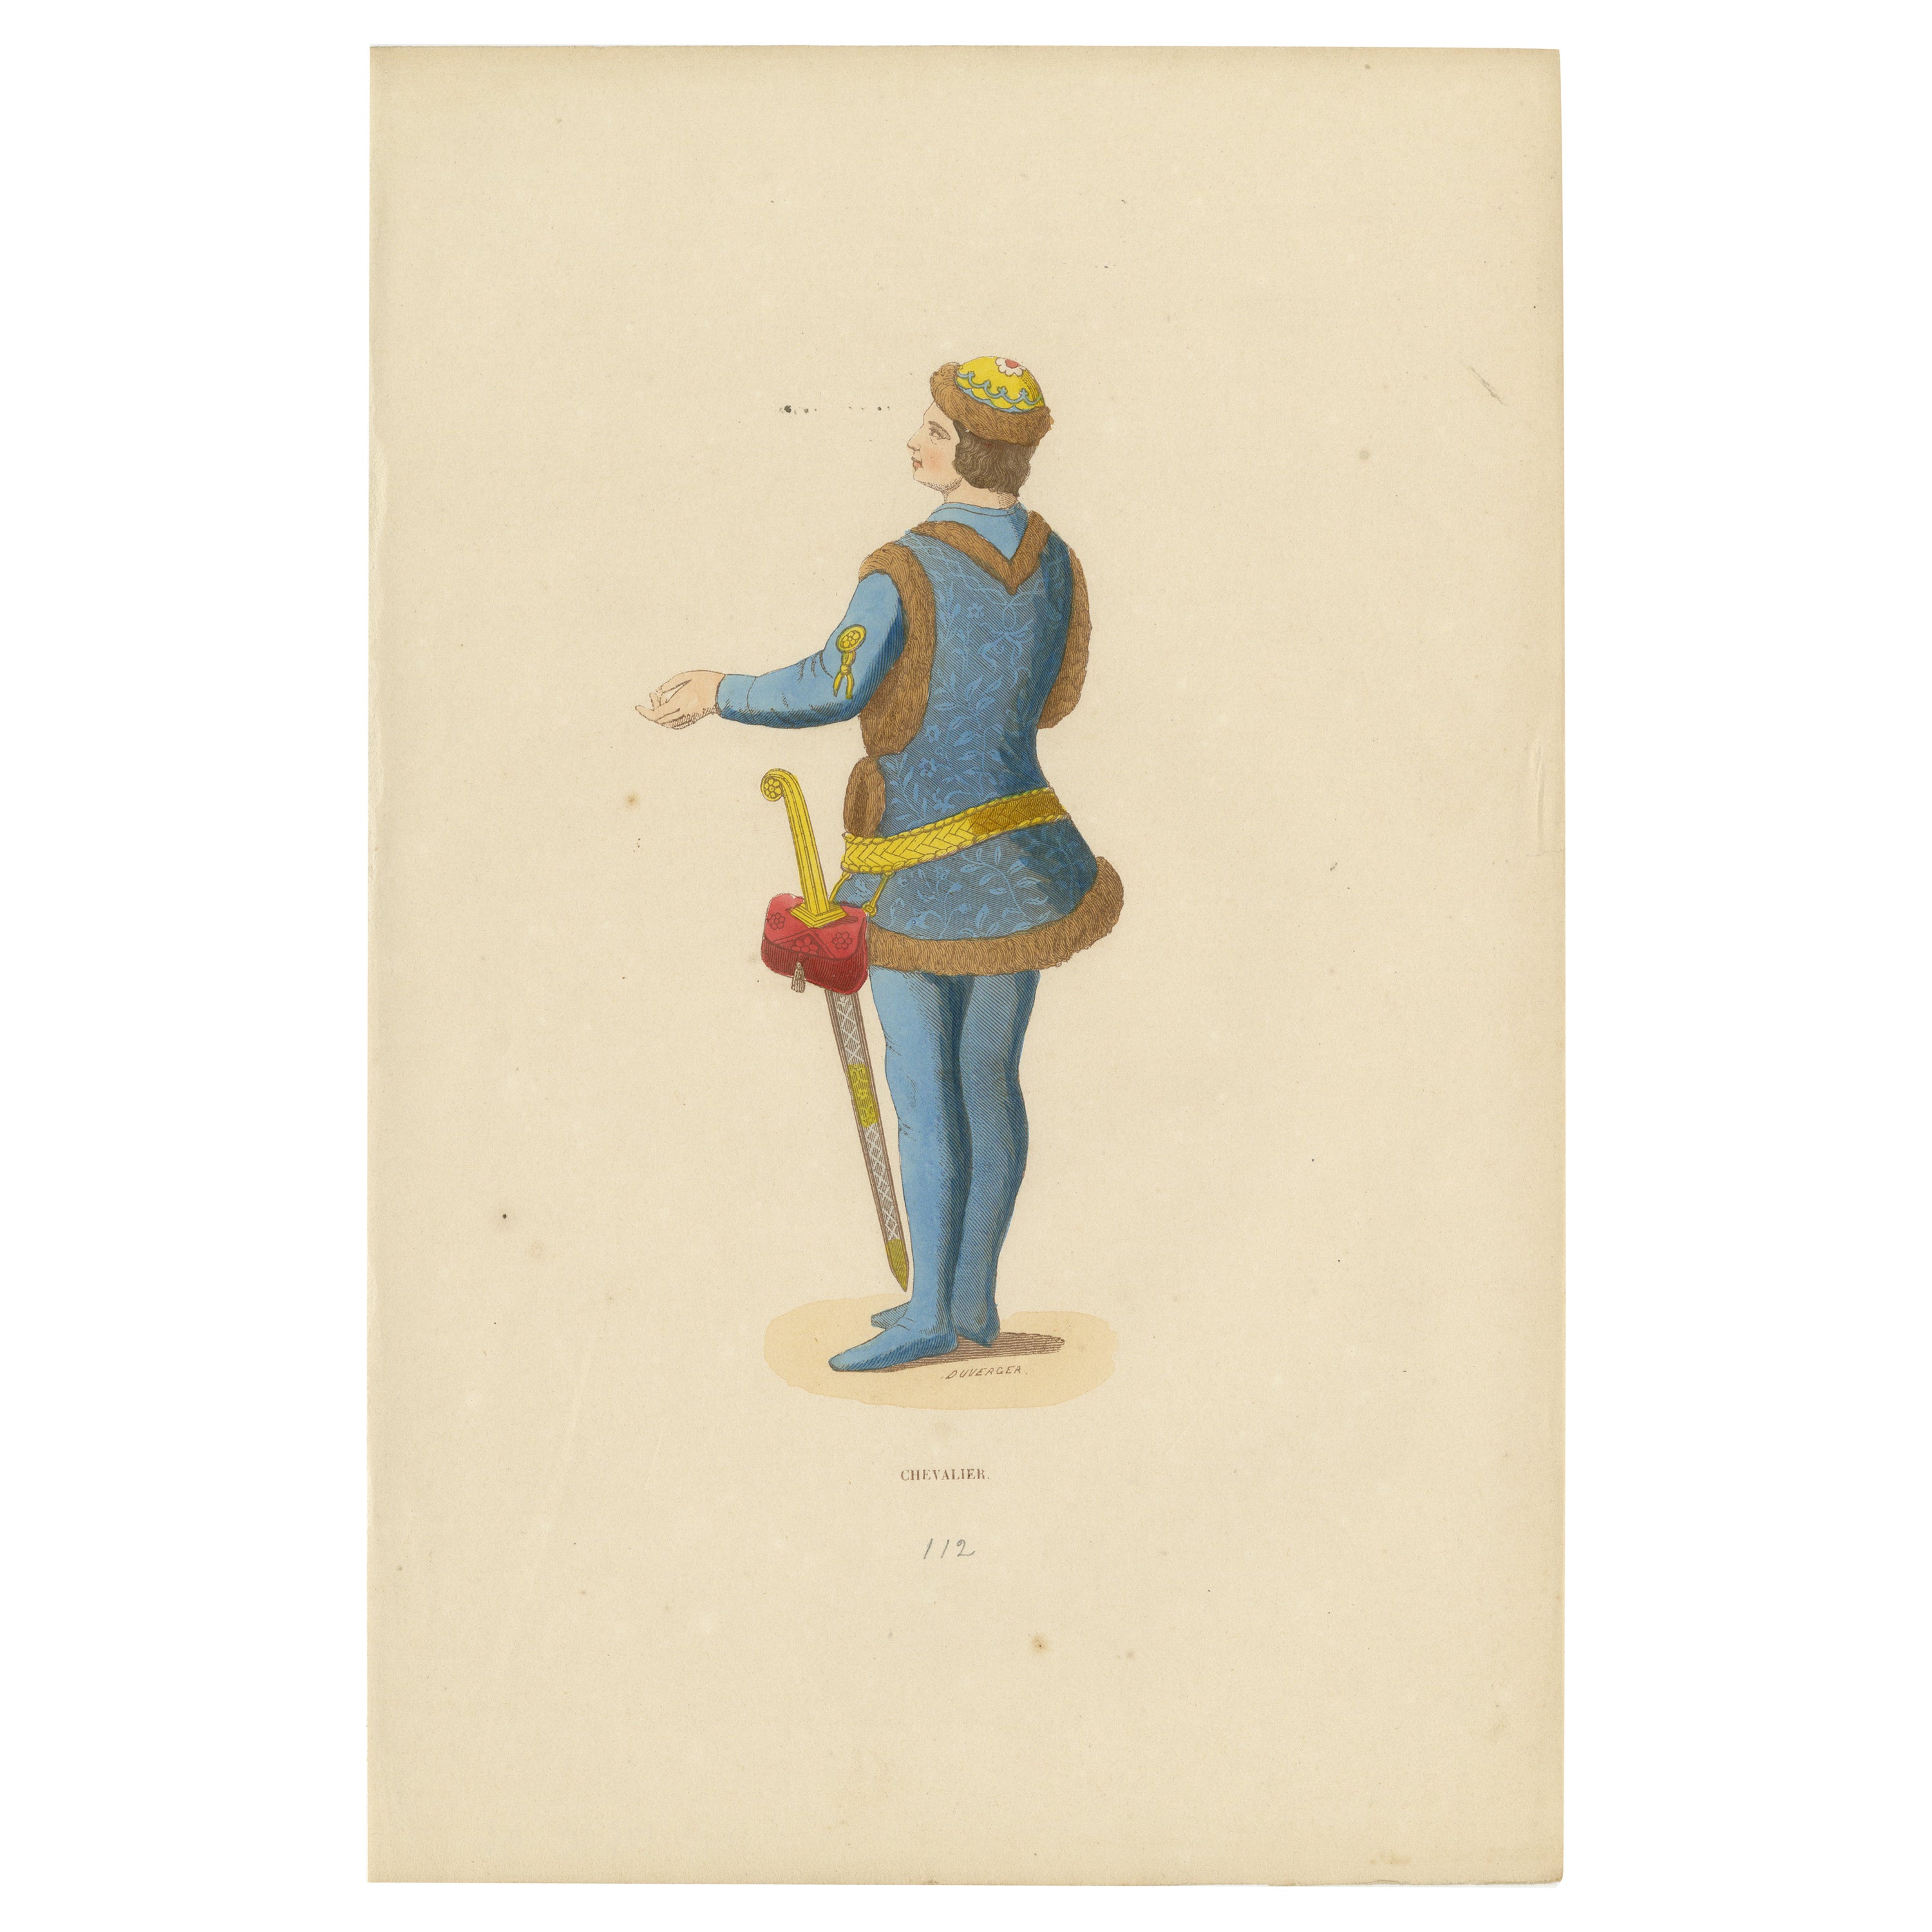 Medieval Knight: Heraldry and Valor in 15th Century Garb, 1847